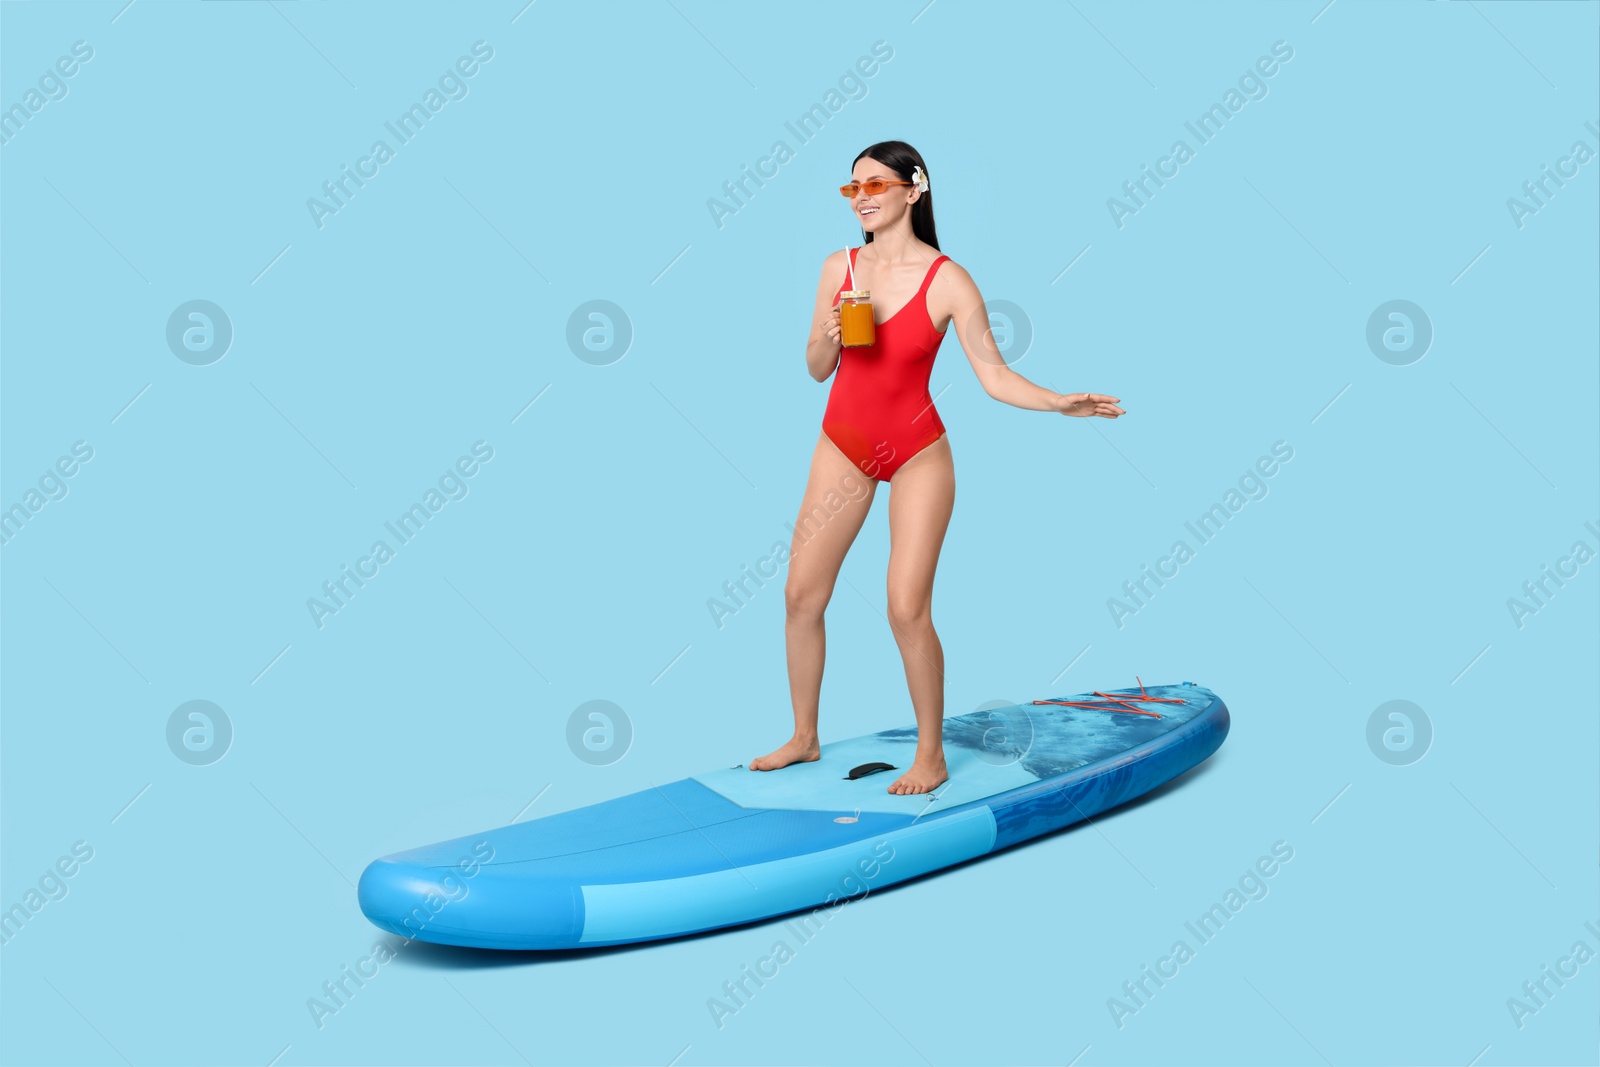 Photo of Happy woman with refreshing drink on SUP board against light blue background